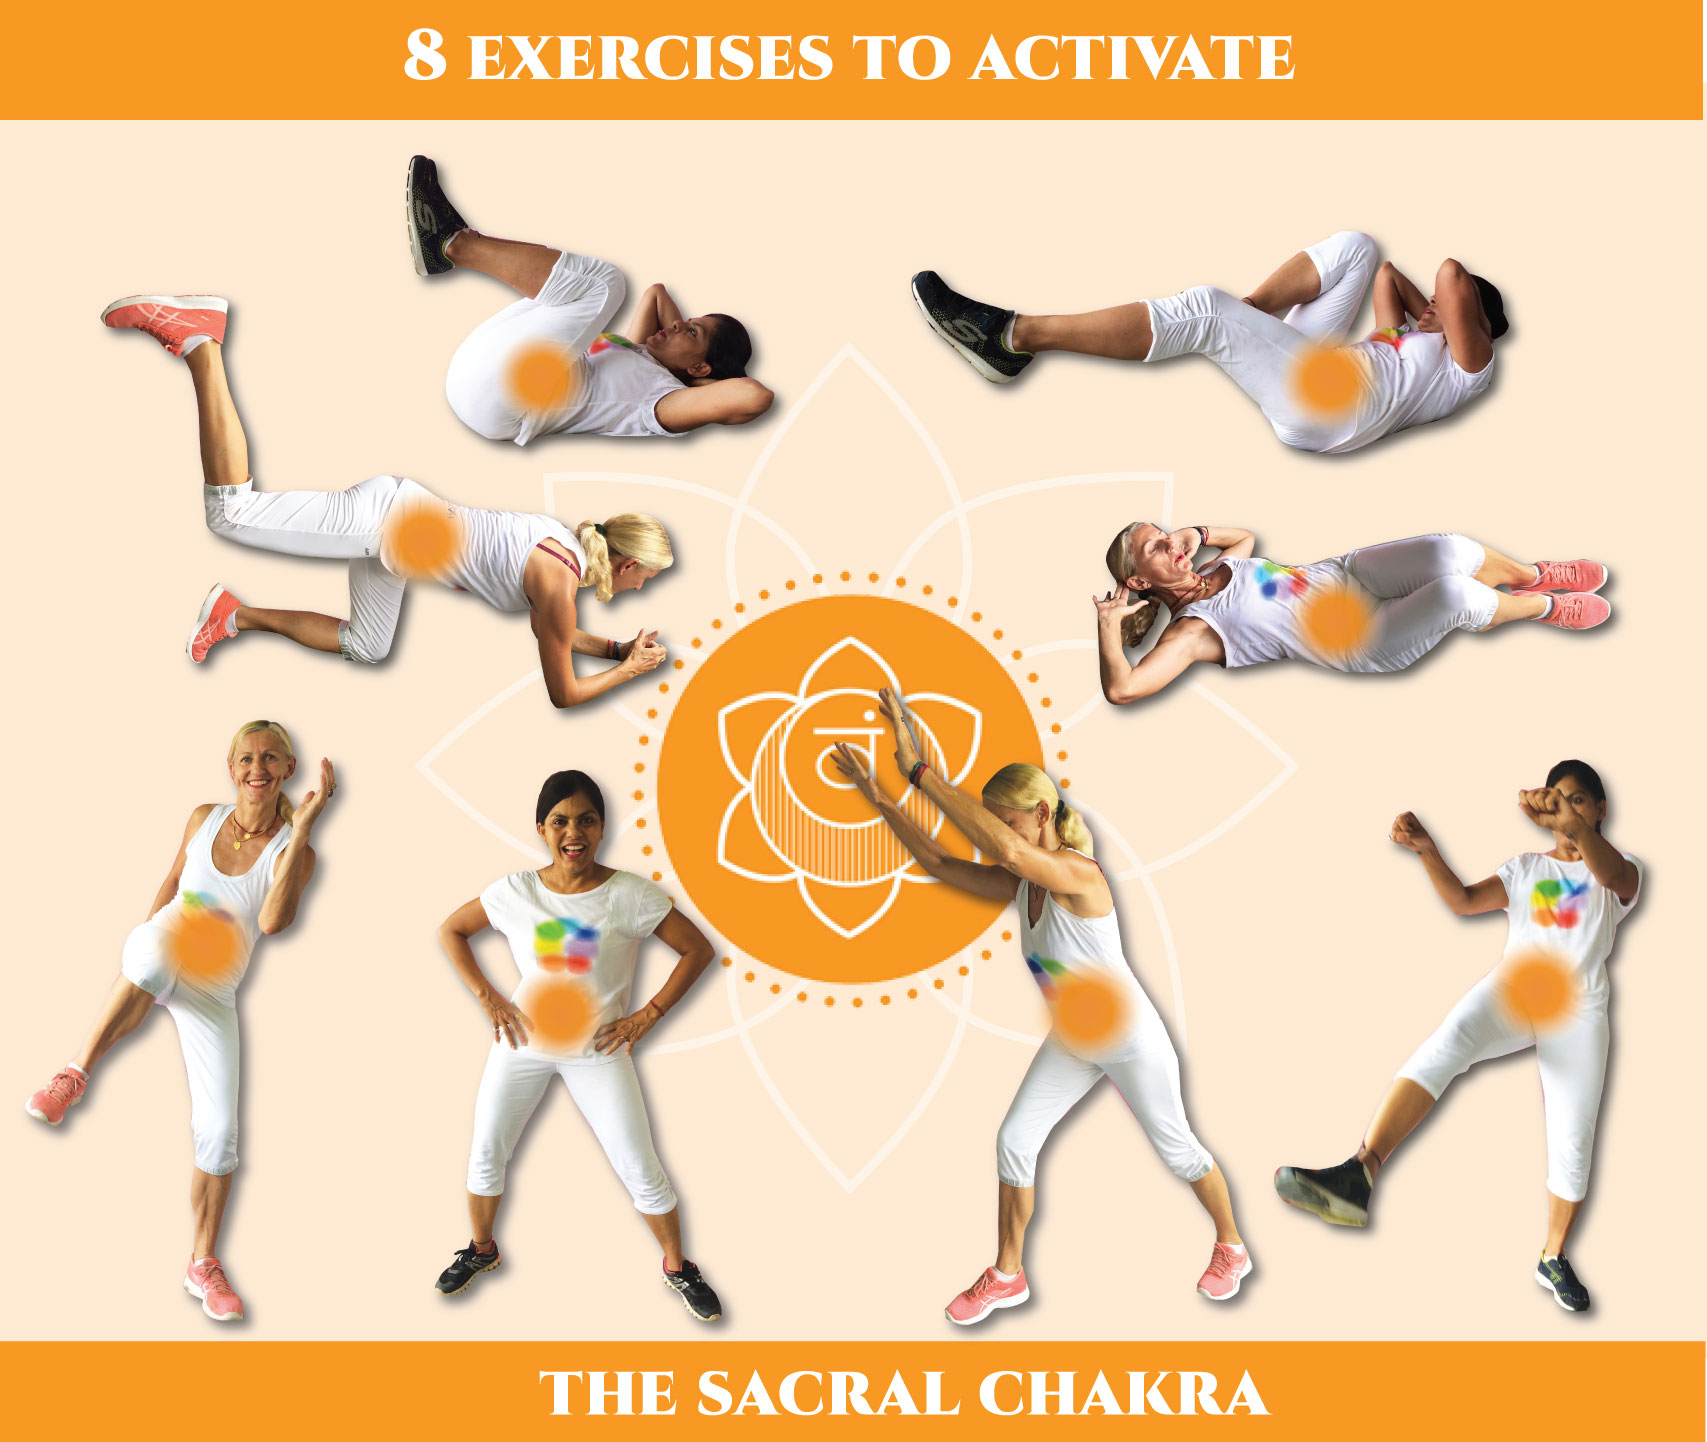 8 exercises to activate the sacral chakra